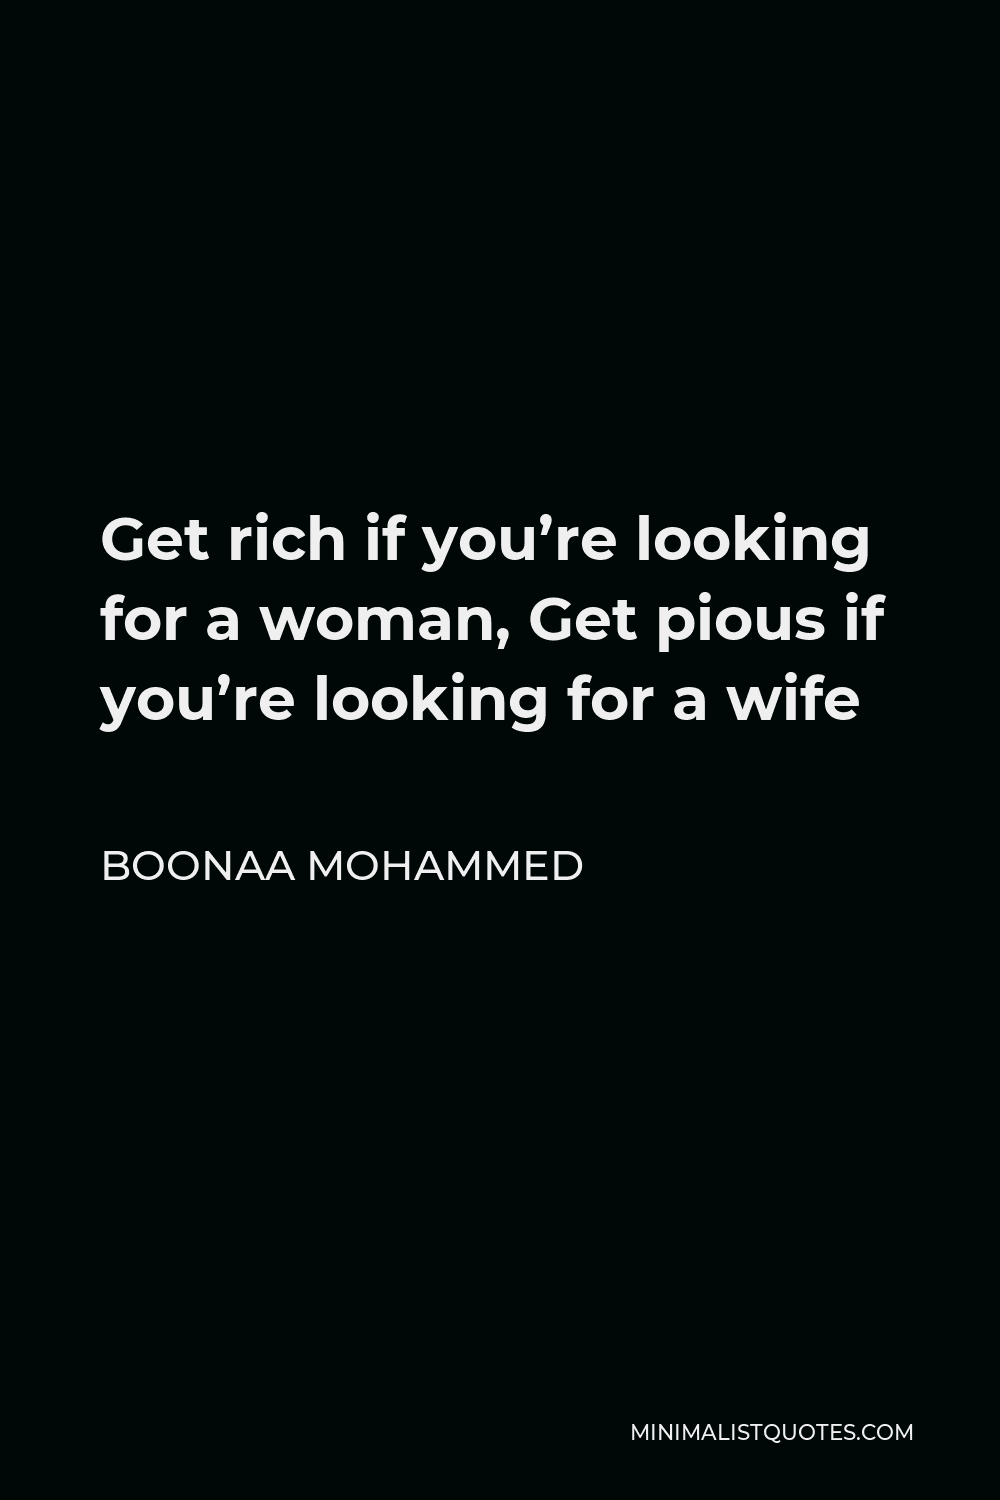 Boonaa Mohammed Quote - Get rich if you’re looking for a woman, Get pious if you’re looking for a wife